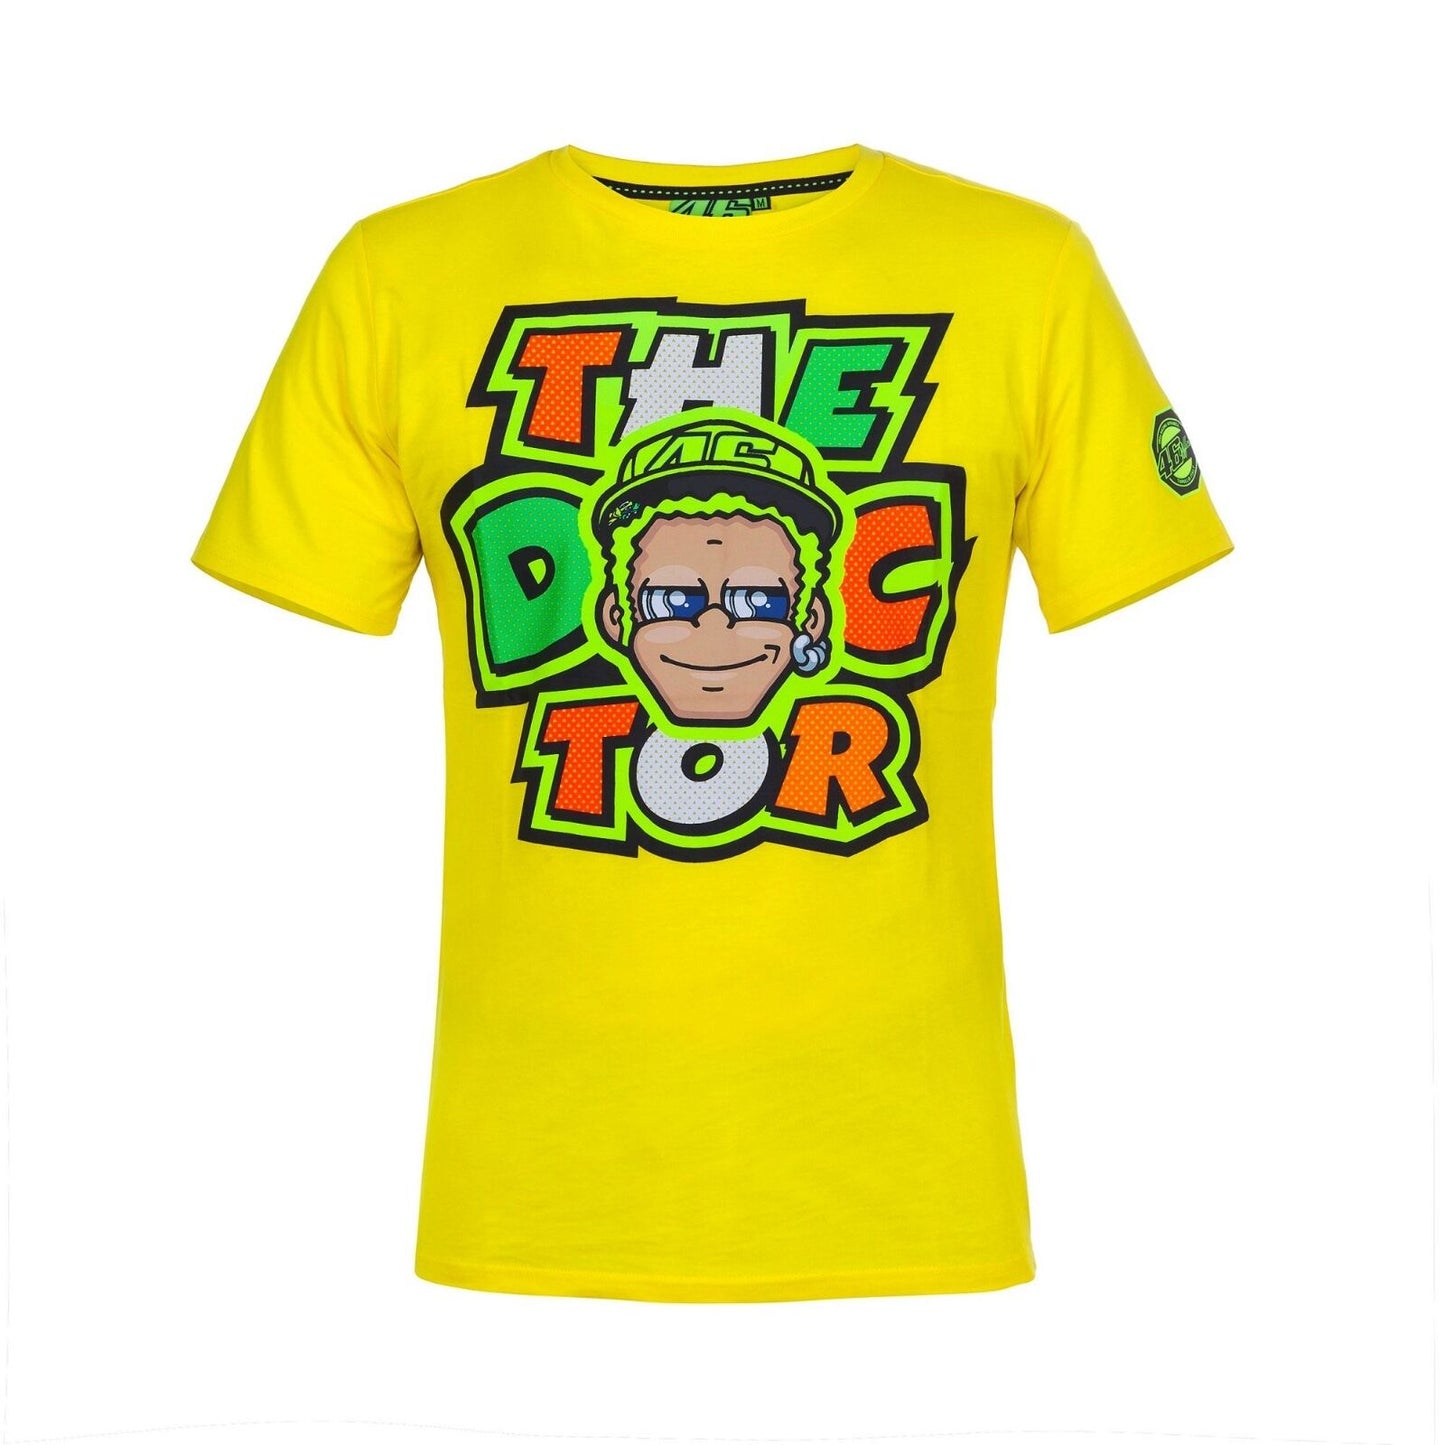 Official Valentino Rossi VR46 The Doctor Yellow T'shirt - Vrmts 261901